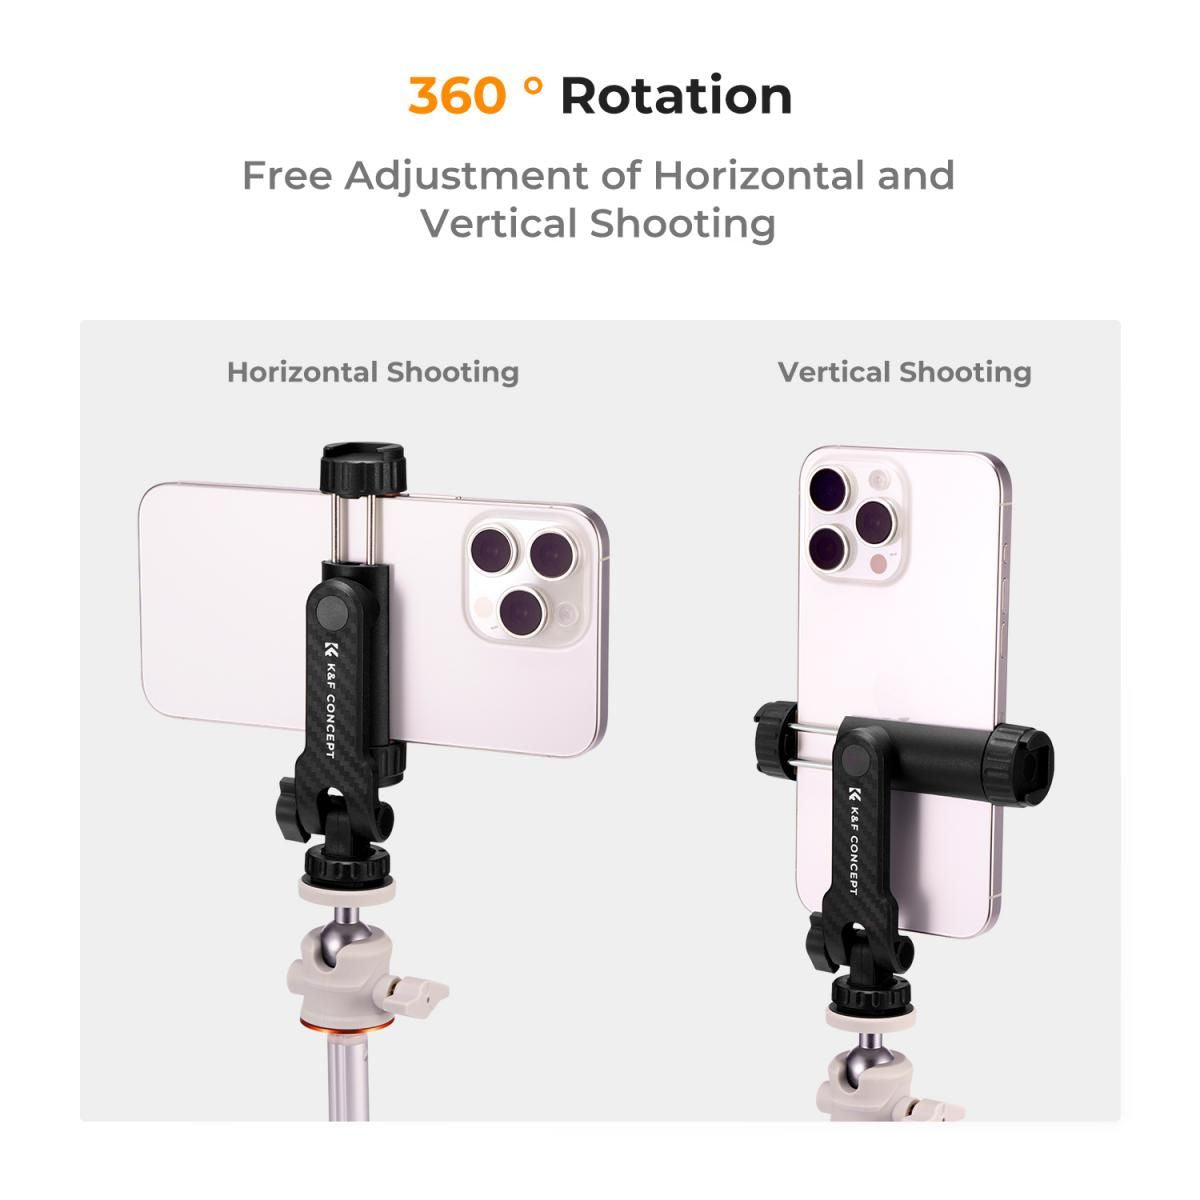 K&F Concept Tripod Mount Phone Holder for iPhone & Android Smartphones with Dual Cold Shoe for LED Fill Lights, Microphones, and Camera Accessories